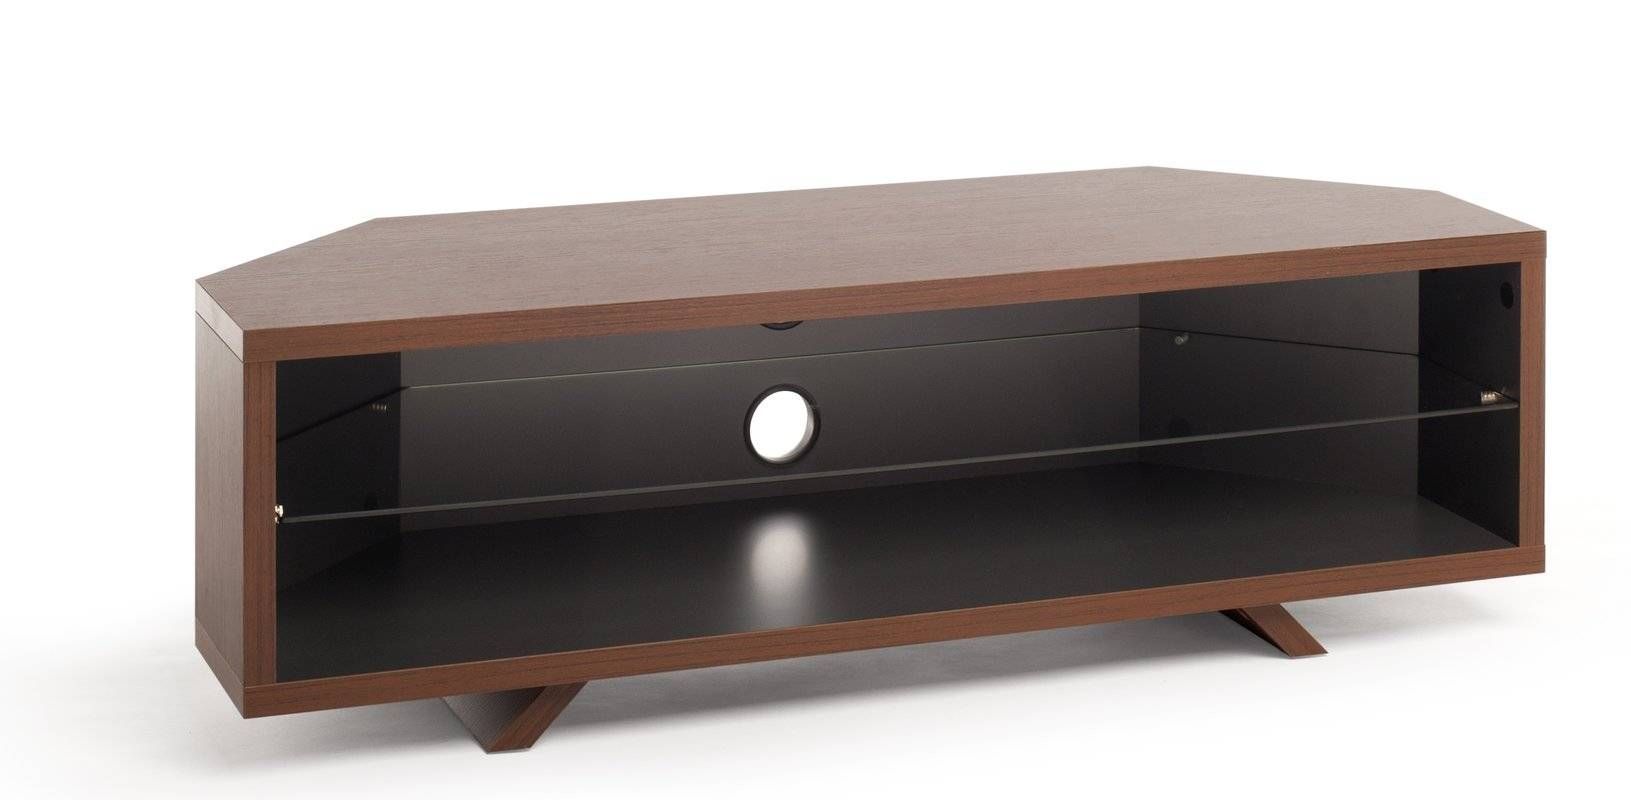 Techlink Bench Corner Tv Stand | Home Design Inspirations Pertaining To Techlink Bench Corner Tv Stands (View 10 of 15)